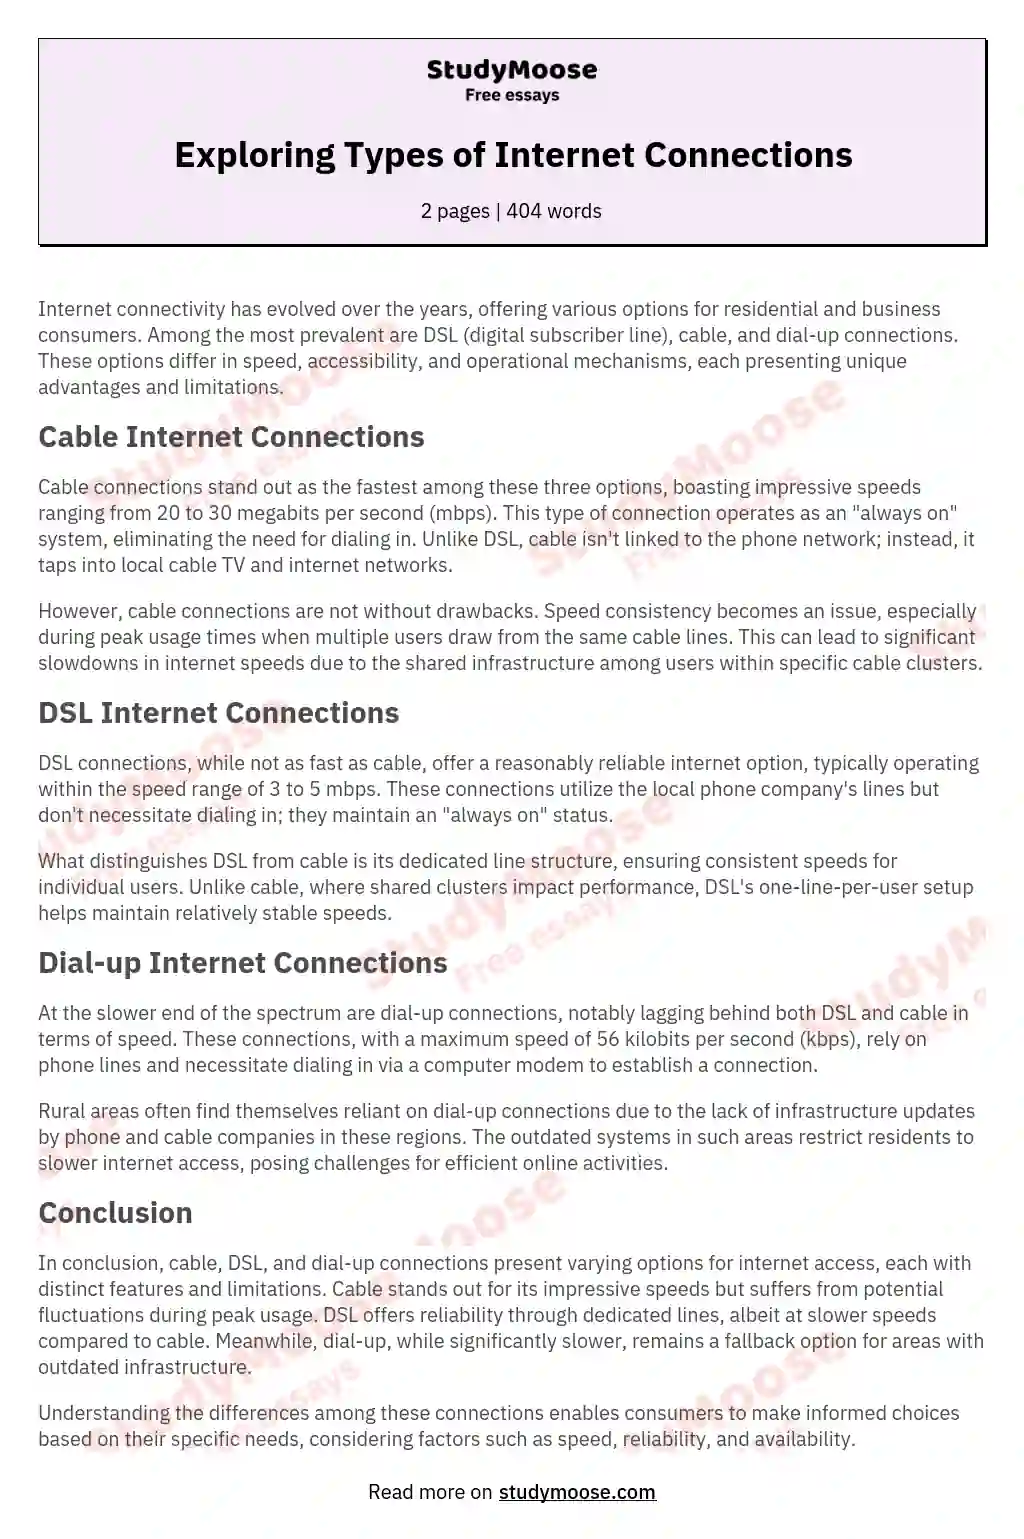 Exploring Types of Internet Connections essay